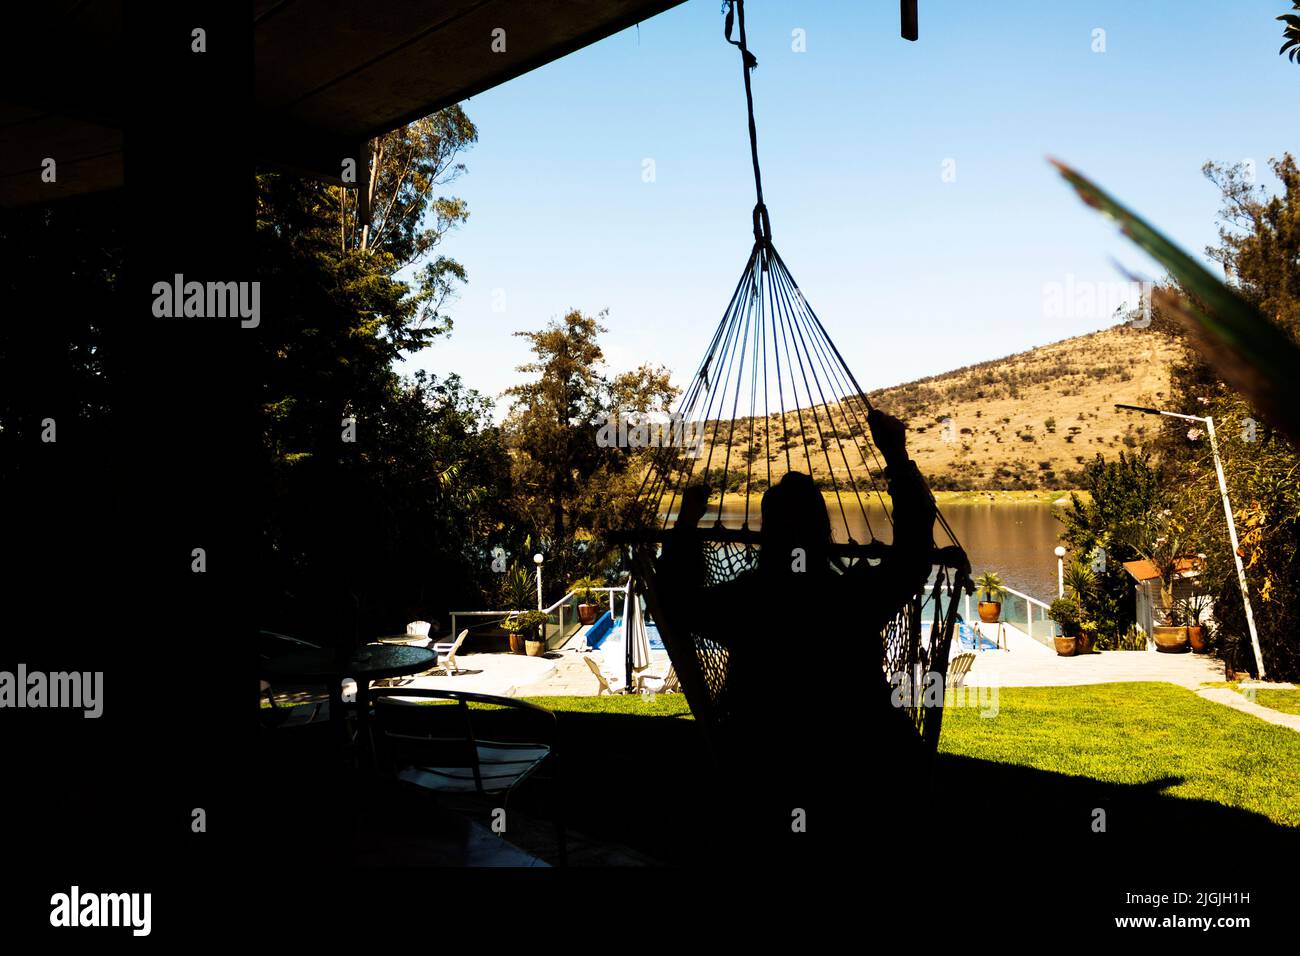 In shadow silhouette of woman sitting on the woven chair of a swing looking towards the lake Stock Photo